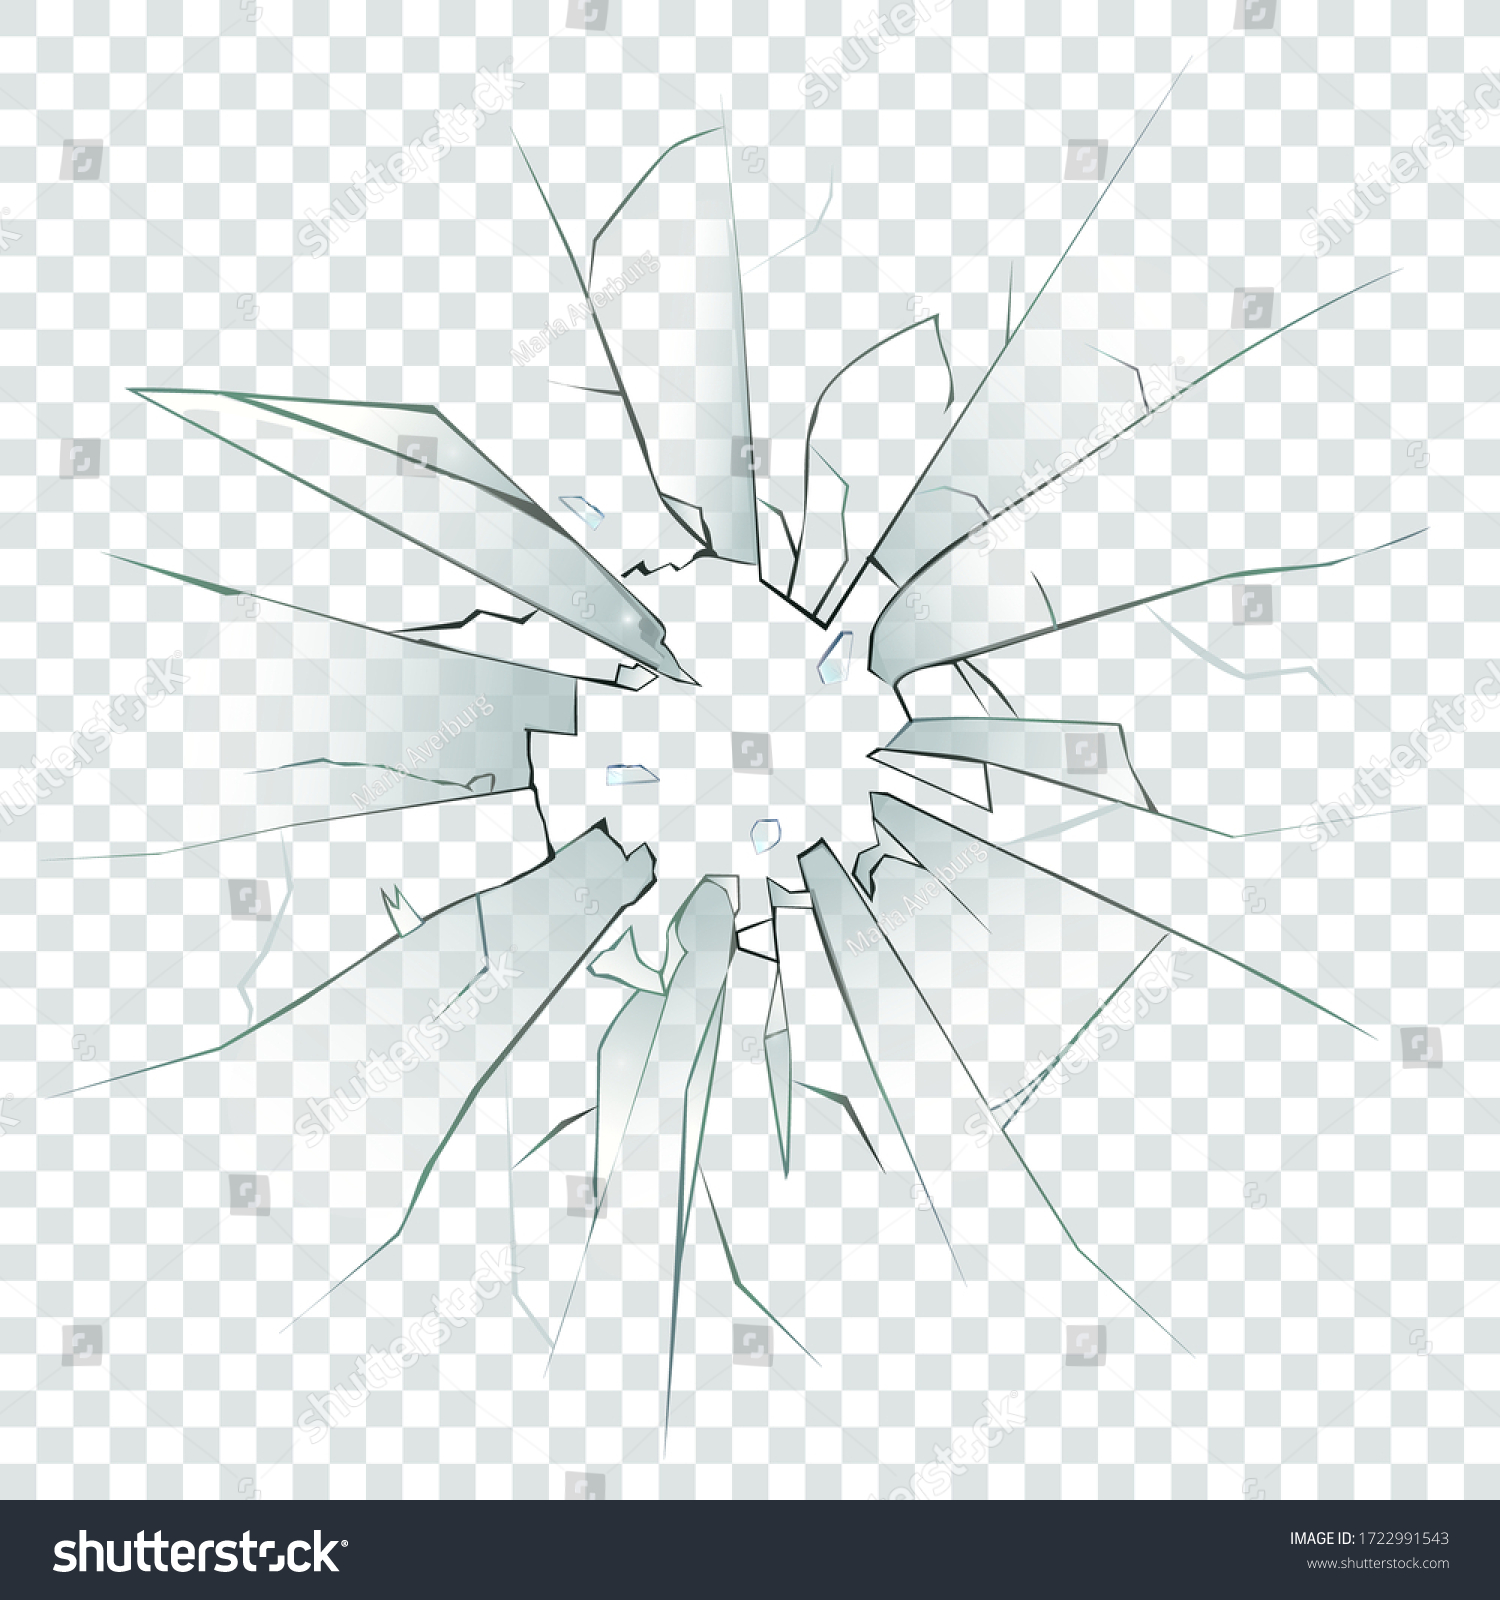 SVG of High detailed realistic broken glass isolated on transparent background. With cracks and bullet marks. Vector illustration. svg